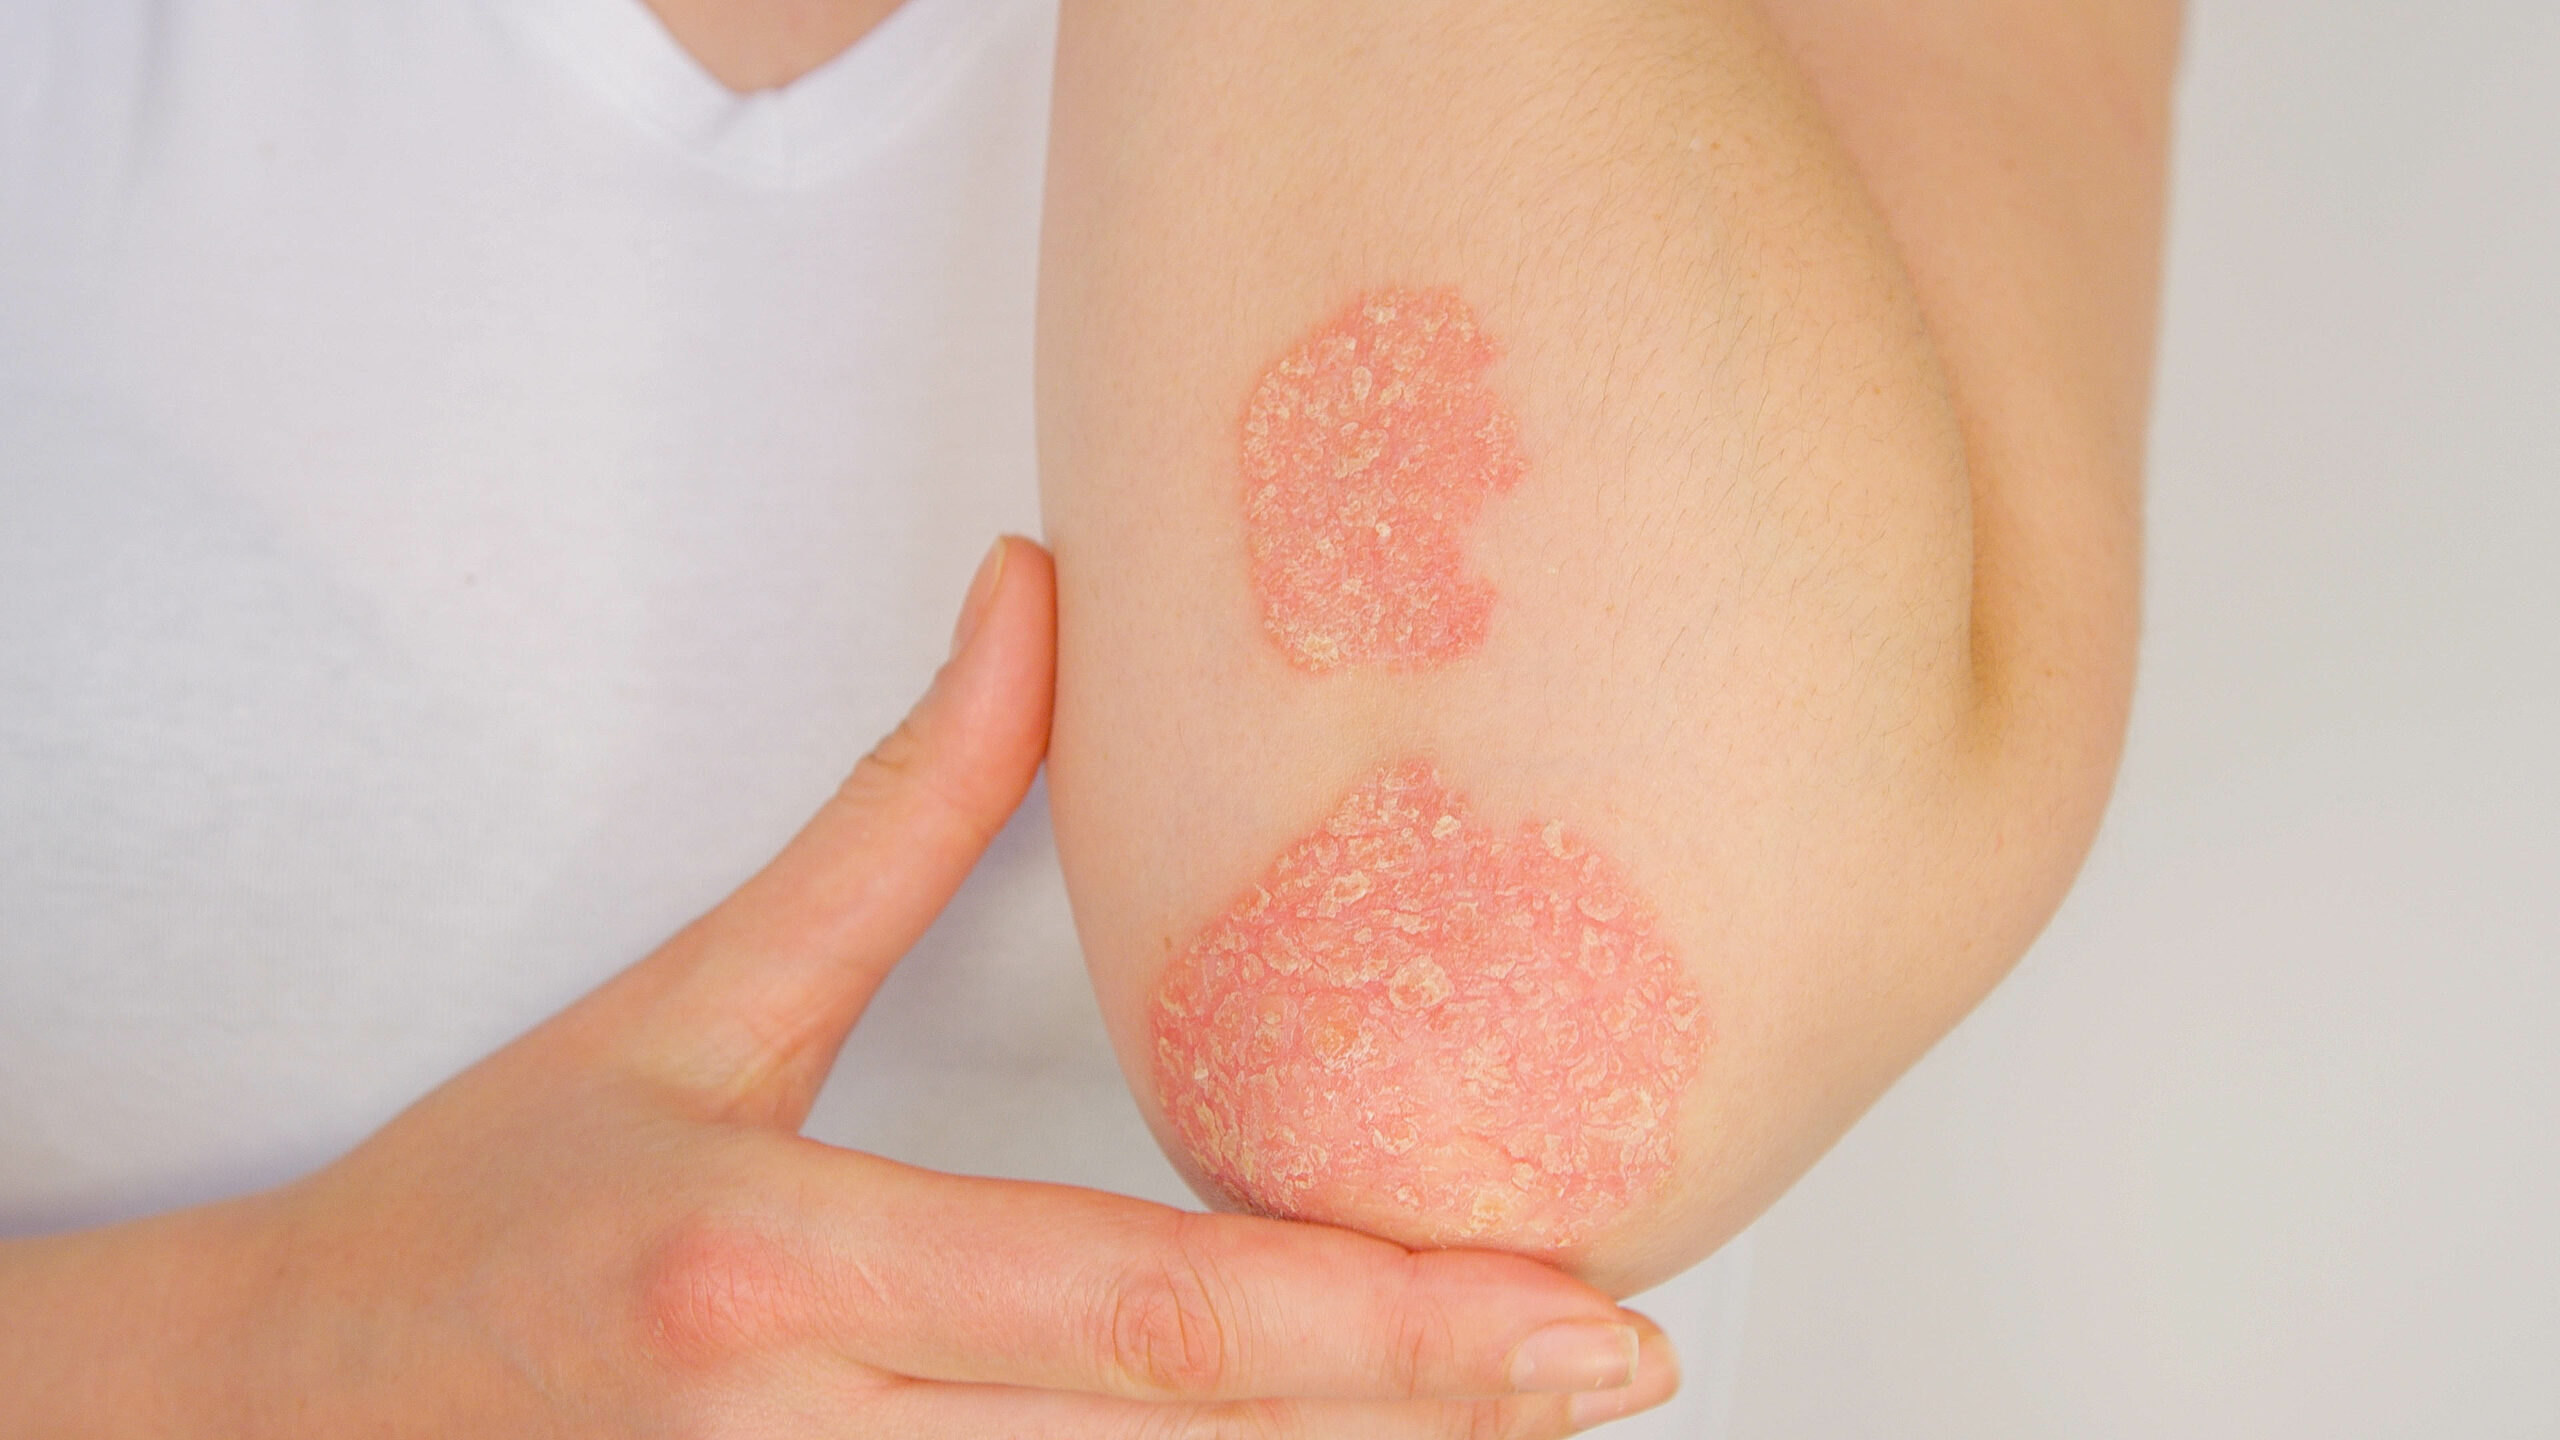 New technology enables better treatment of skin diseases – a medical practice